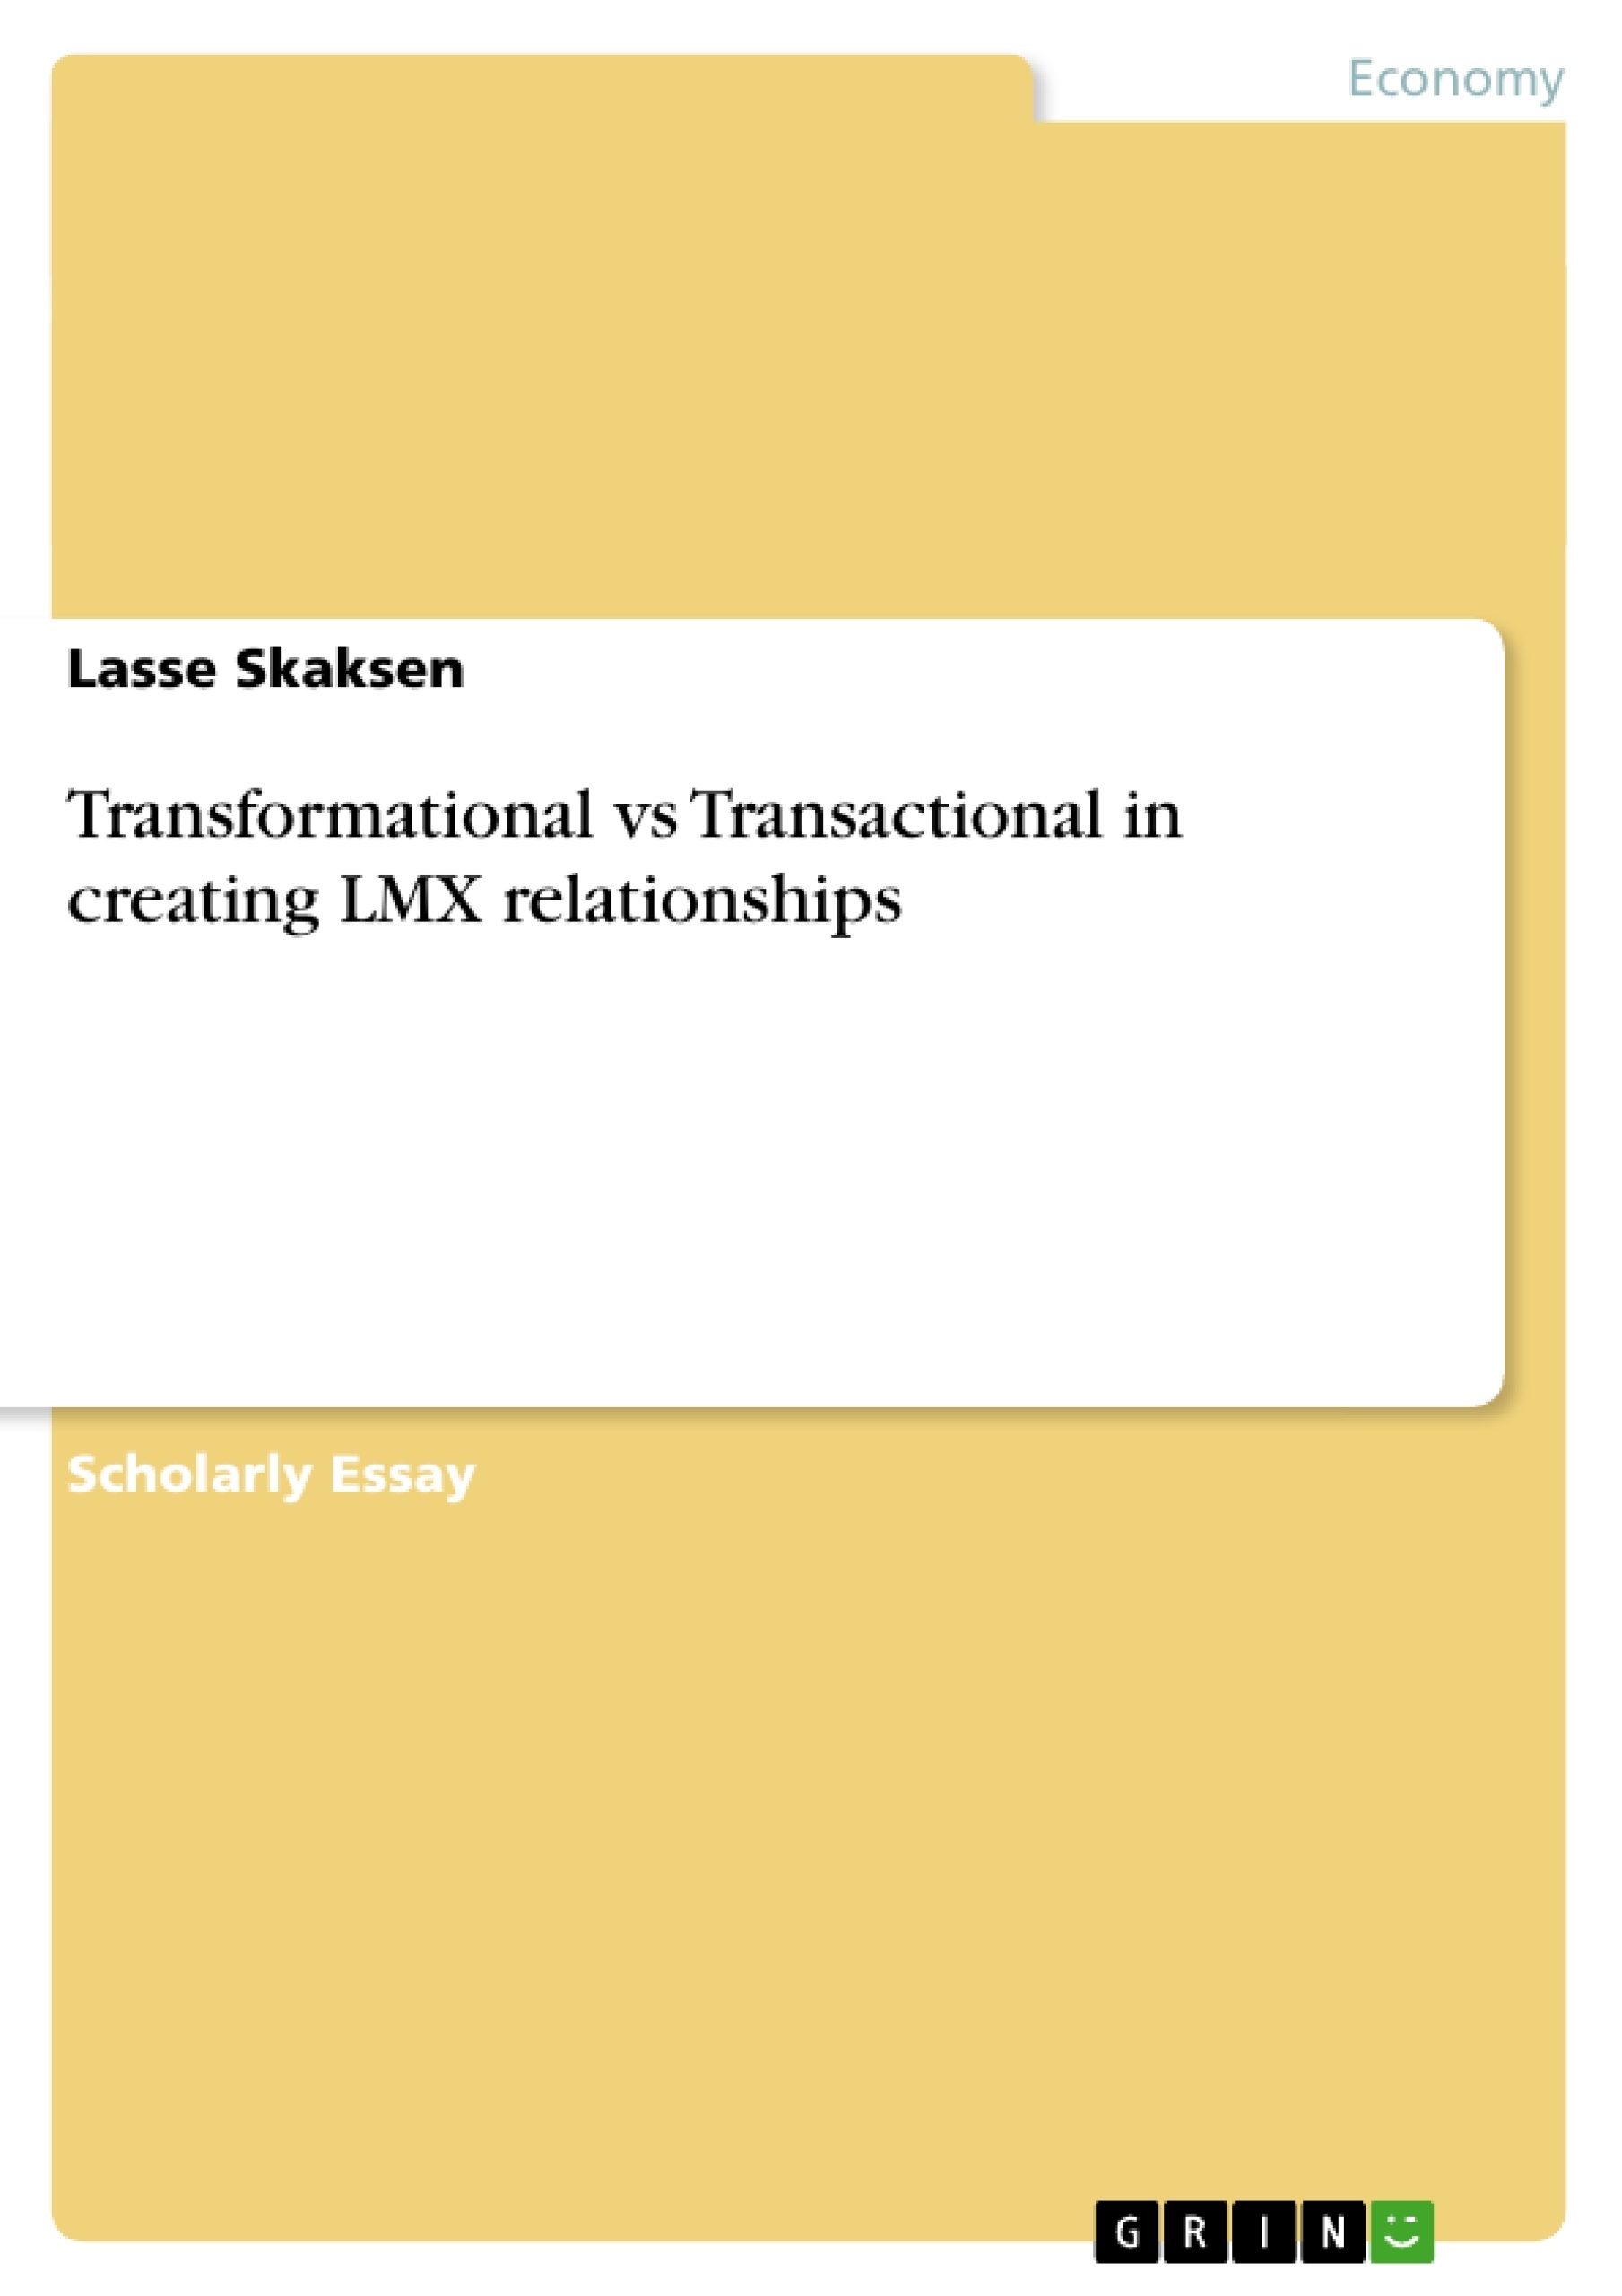 Title: Transformational vs Transactional in creating LMX relationships